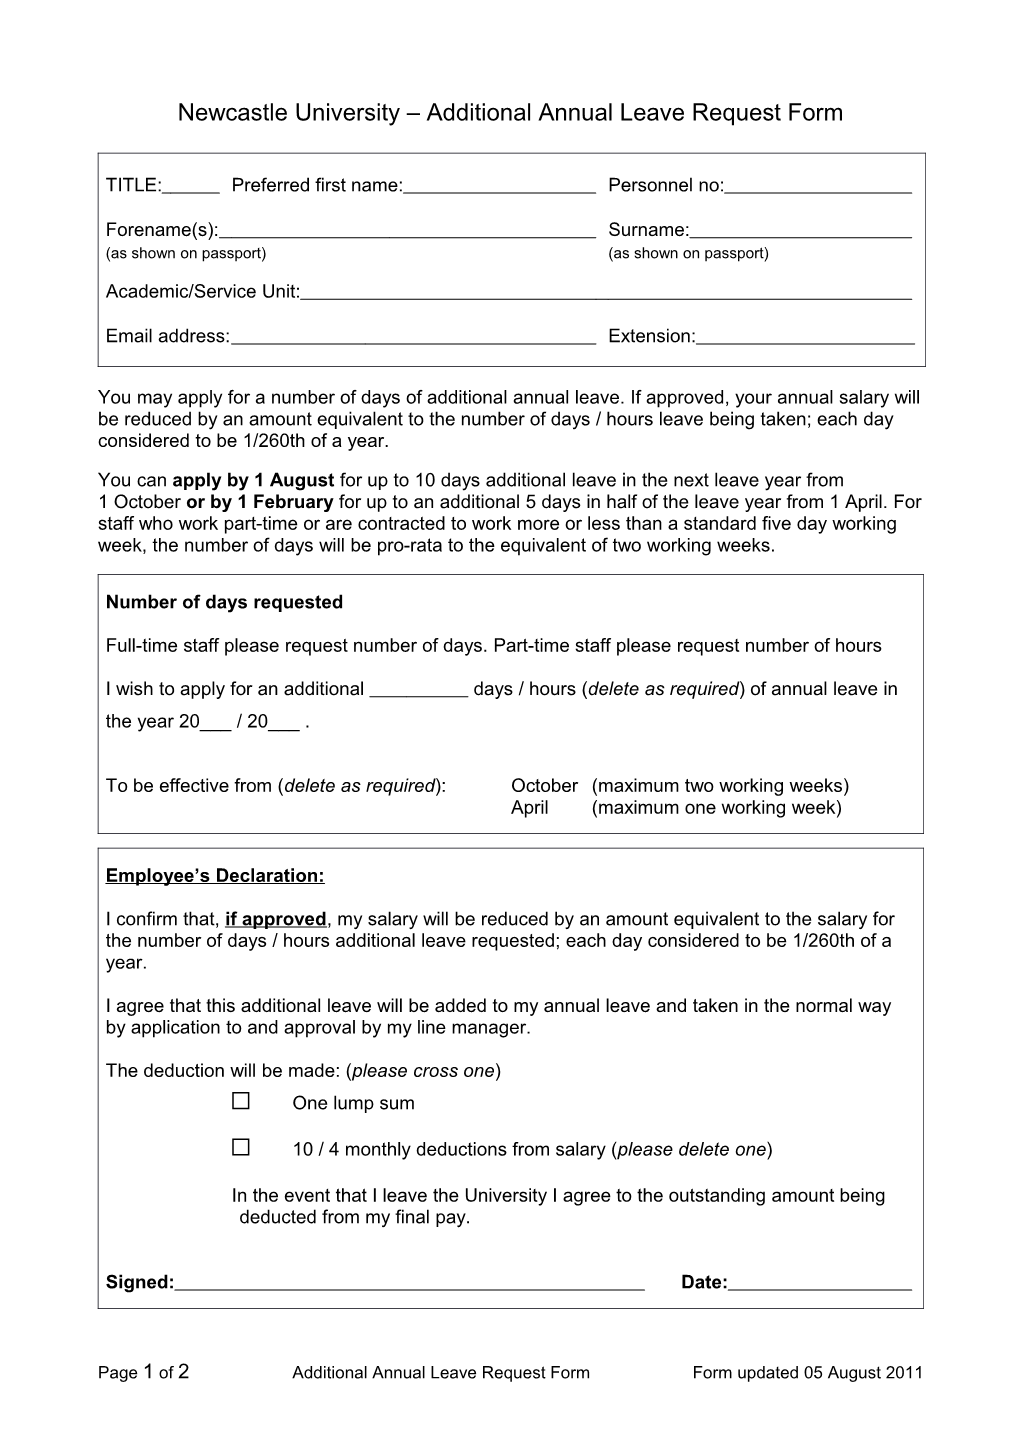 Newcastle University Additional Annual Leave Request Form